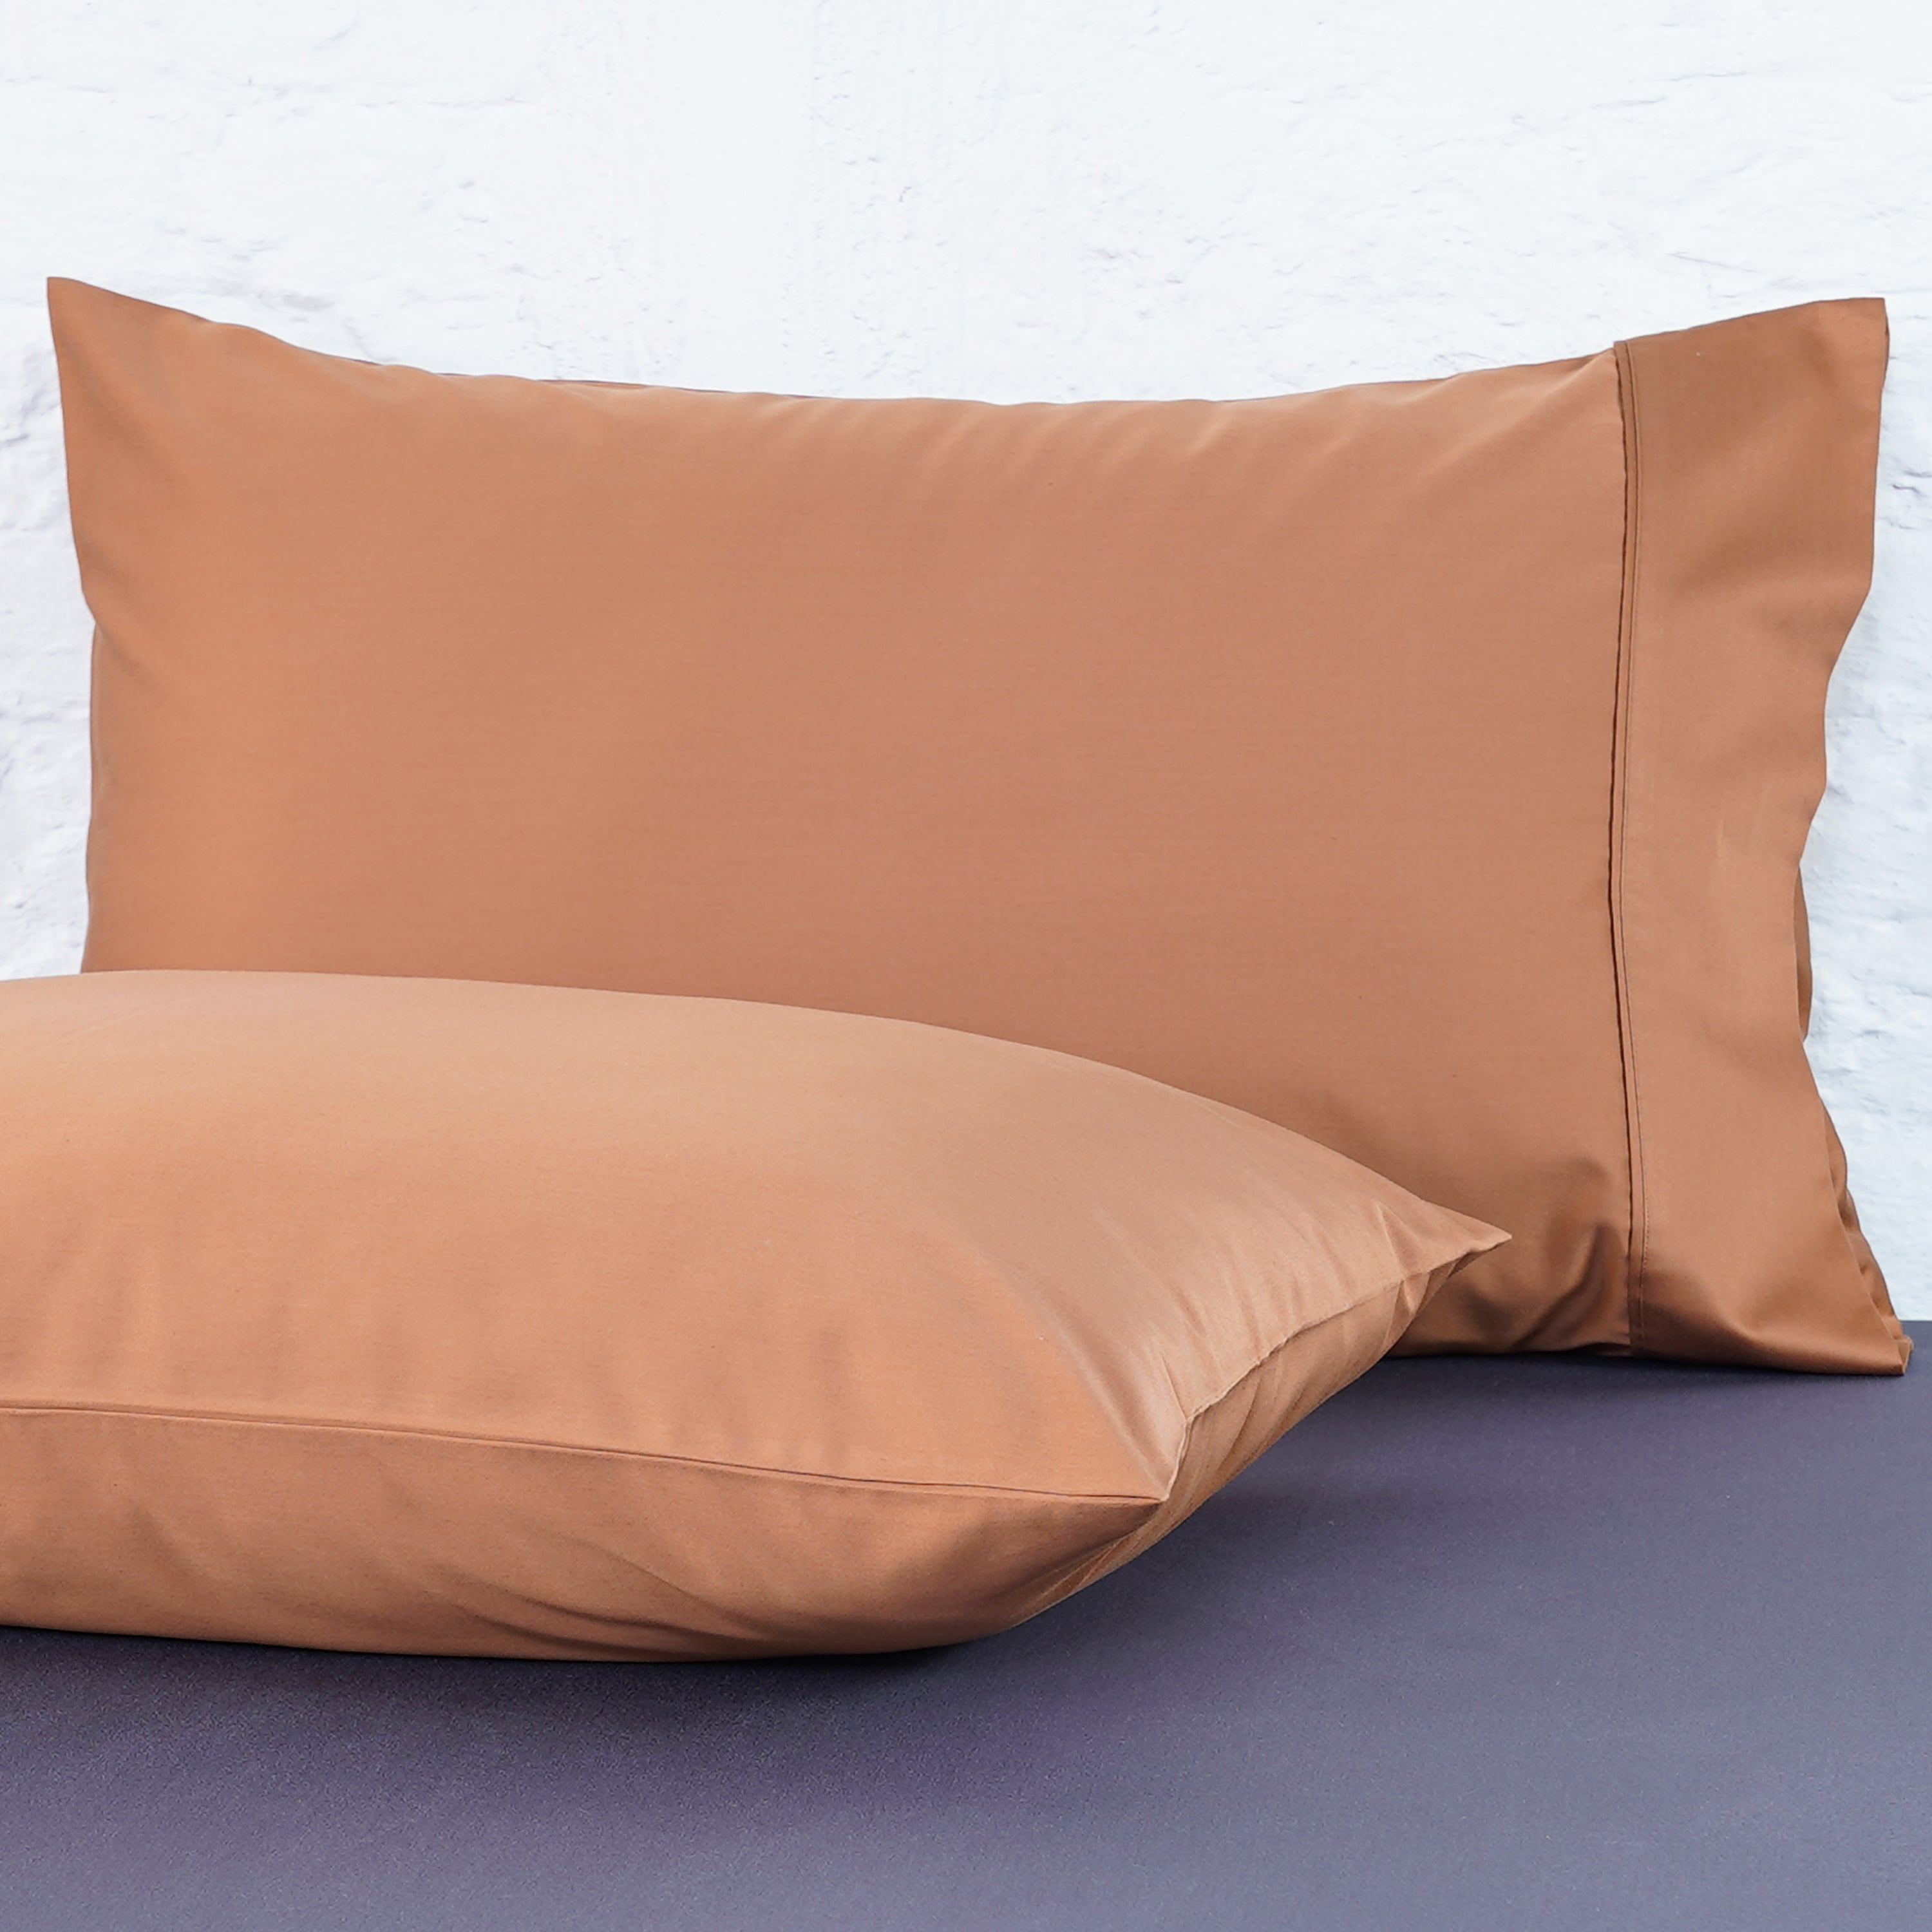 Ackly Bamboo - Terracotta Pillowcases